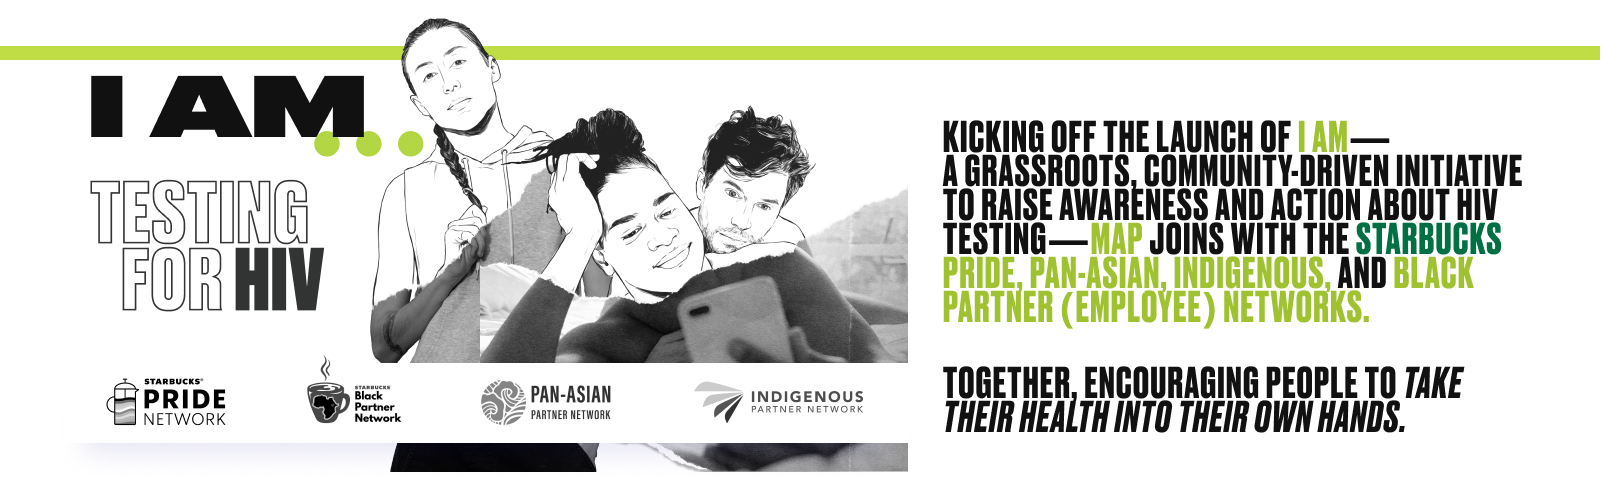 I AM...TESTING FOR HIV. Kicking off the launch of I AM - a grassroots, community-driven initiative to raise awareness and action about HIV testing - MAP joins with the Starbucks Pride, Pan-Asian, Indigenous, and Black Partner (Employee) Networks. Together, encouraging people to take their health into their own hands.